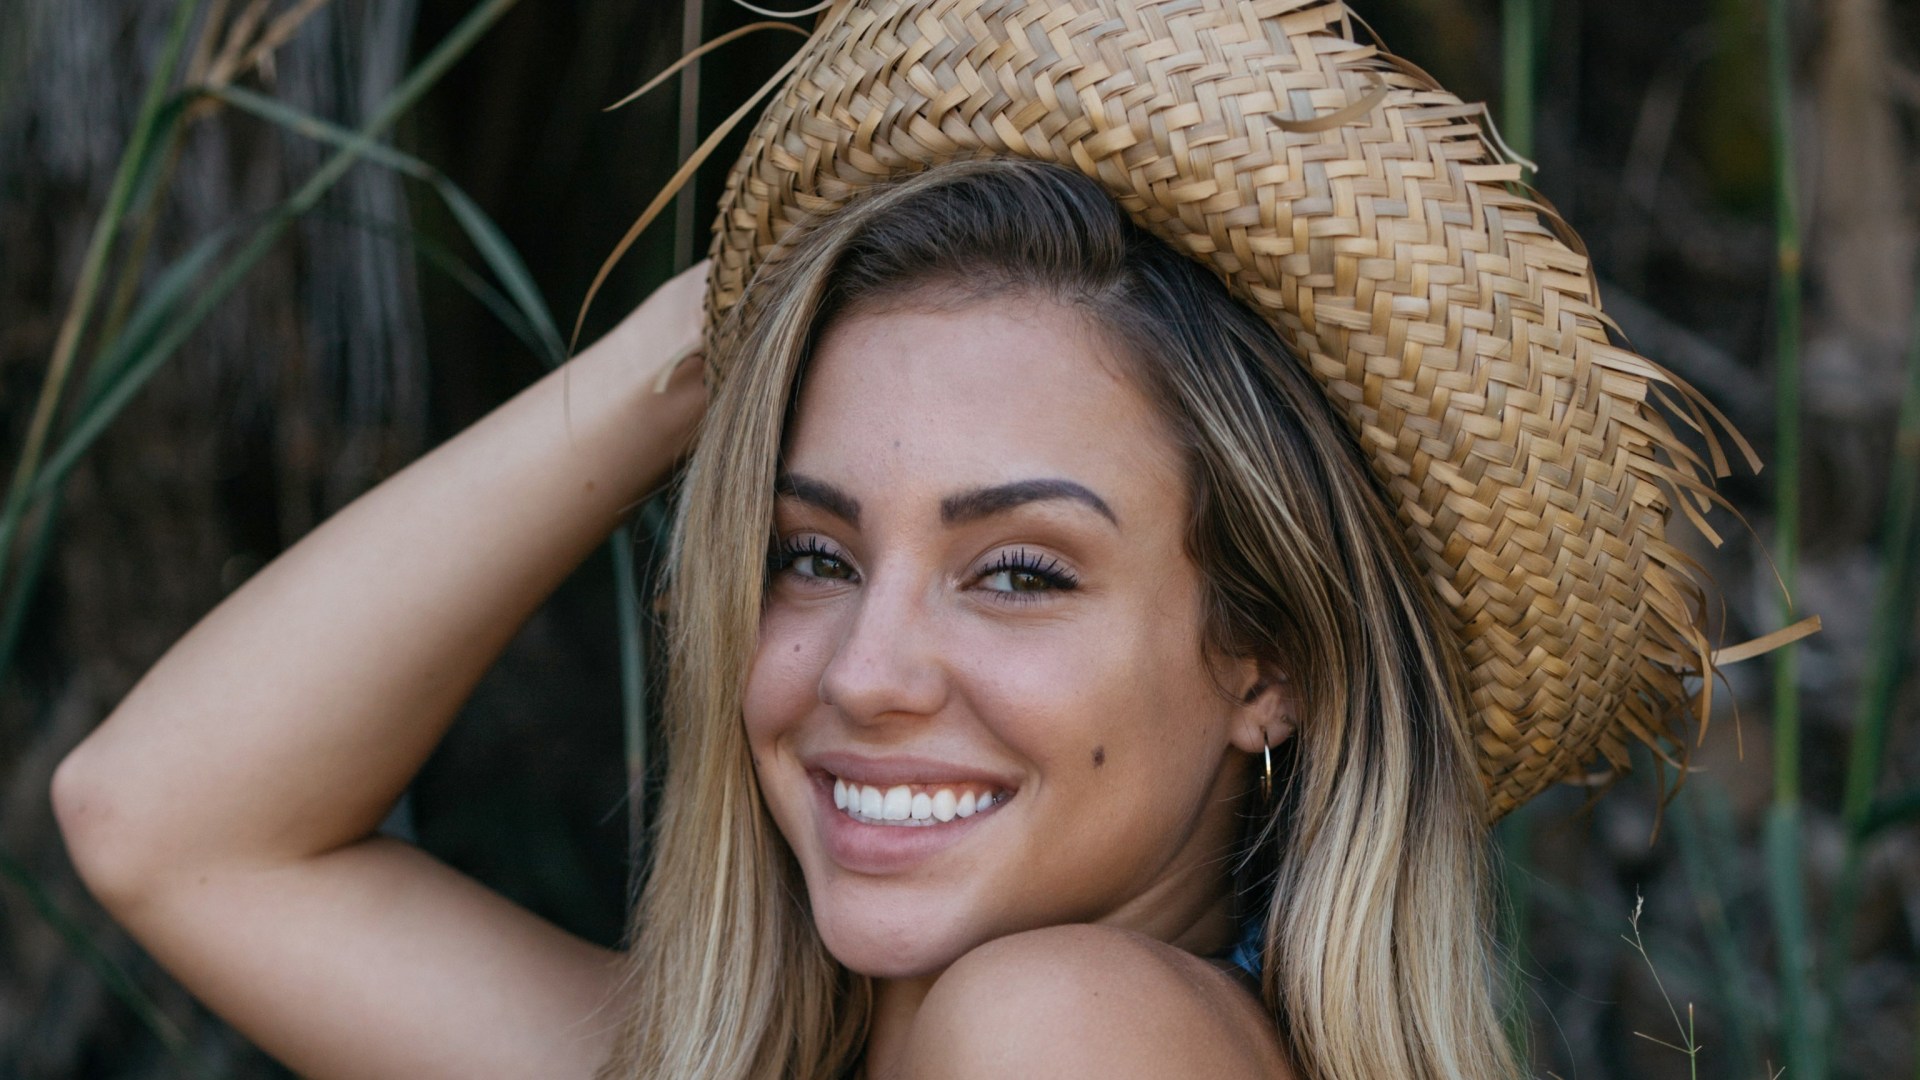 Charly Jordan flaunts her gorgeous white bikini bum as she celebrates landing her first big TV acting role – click here to see more!